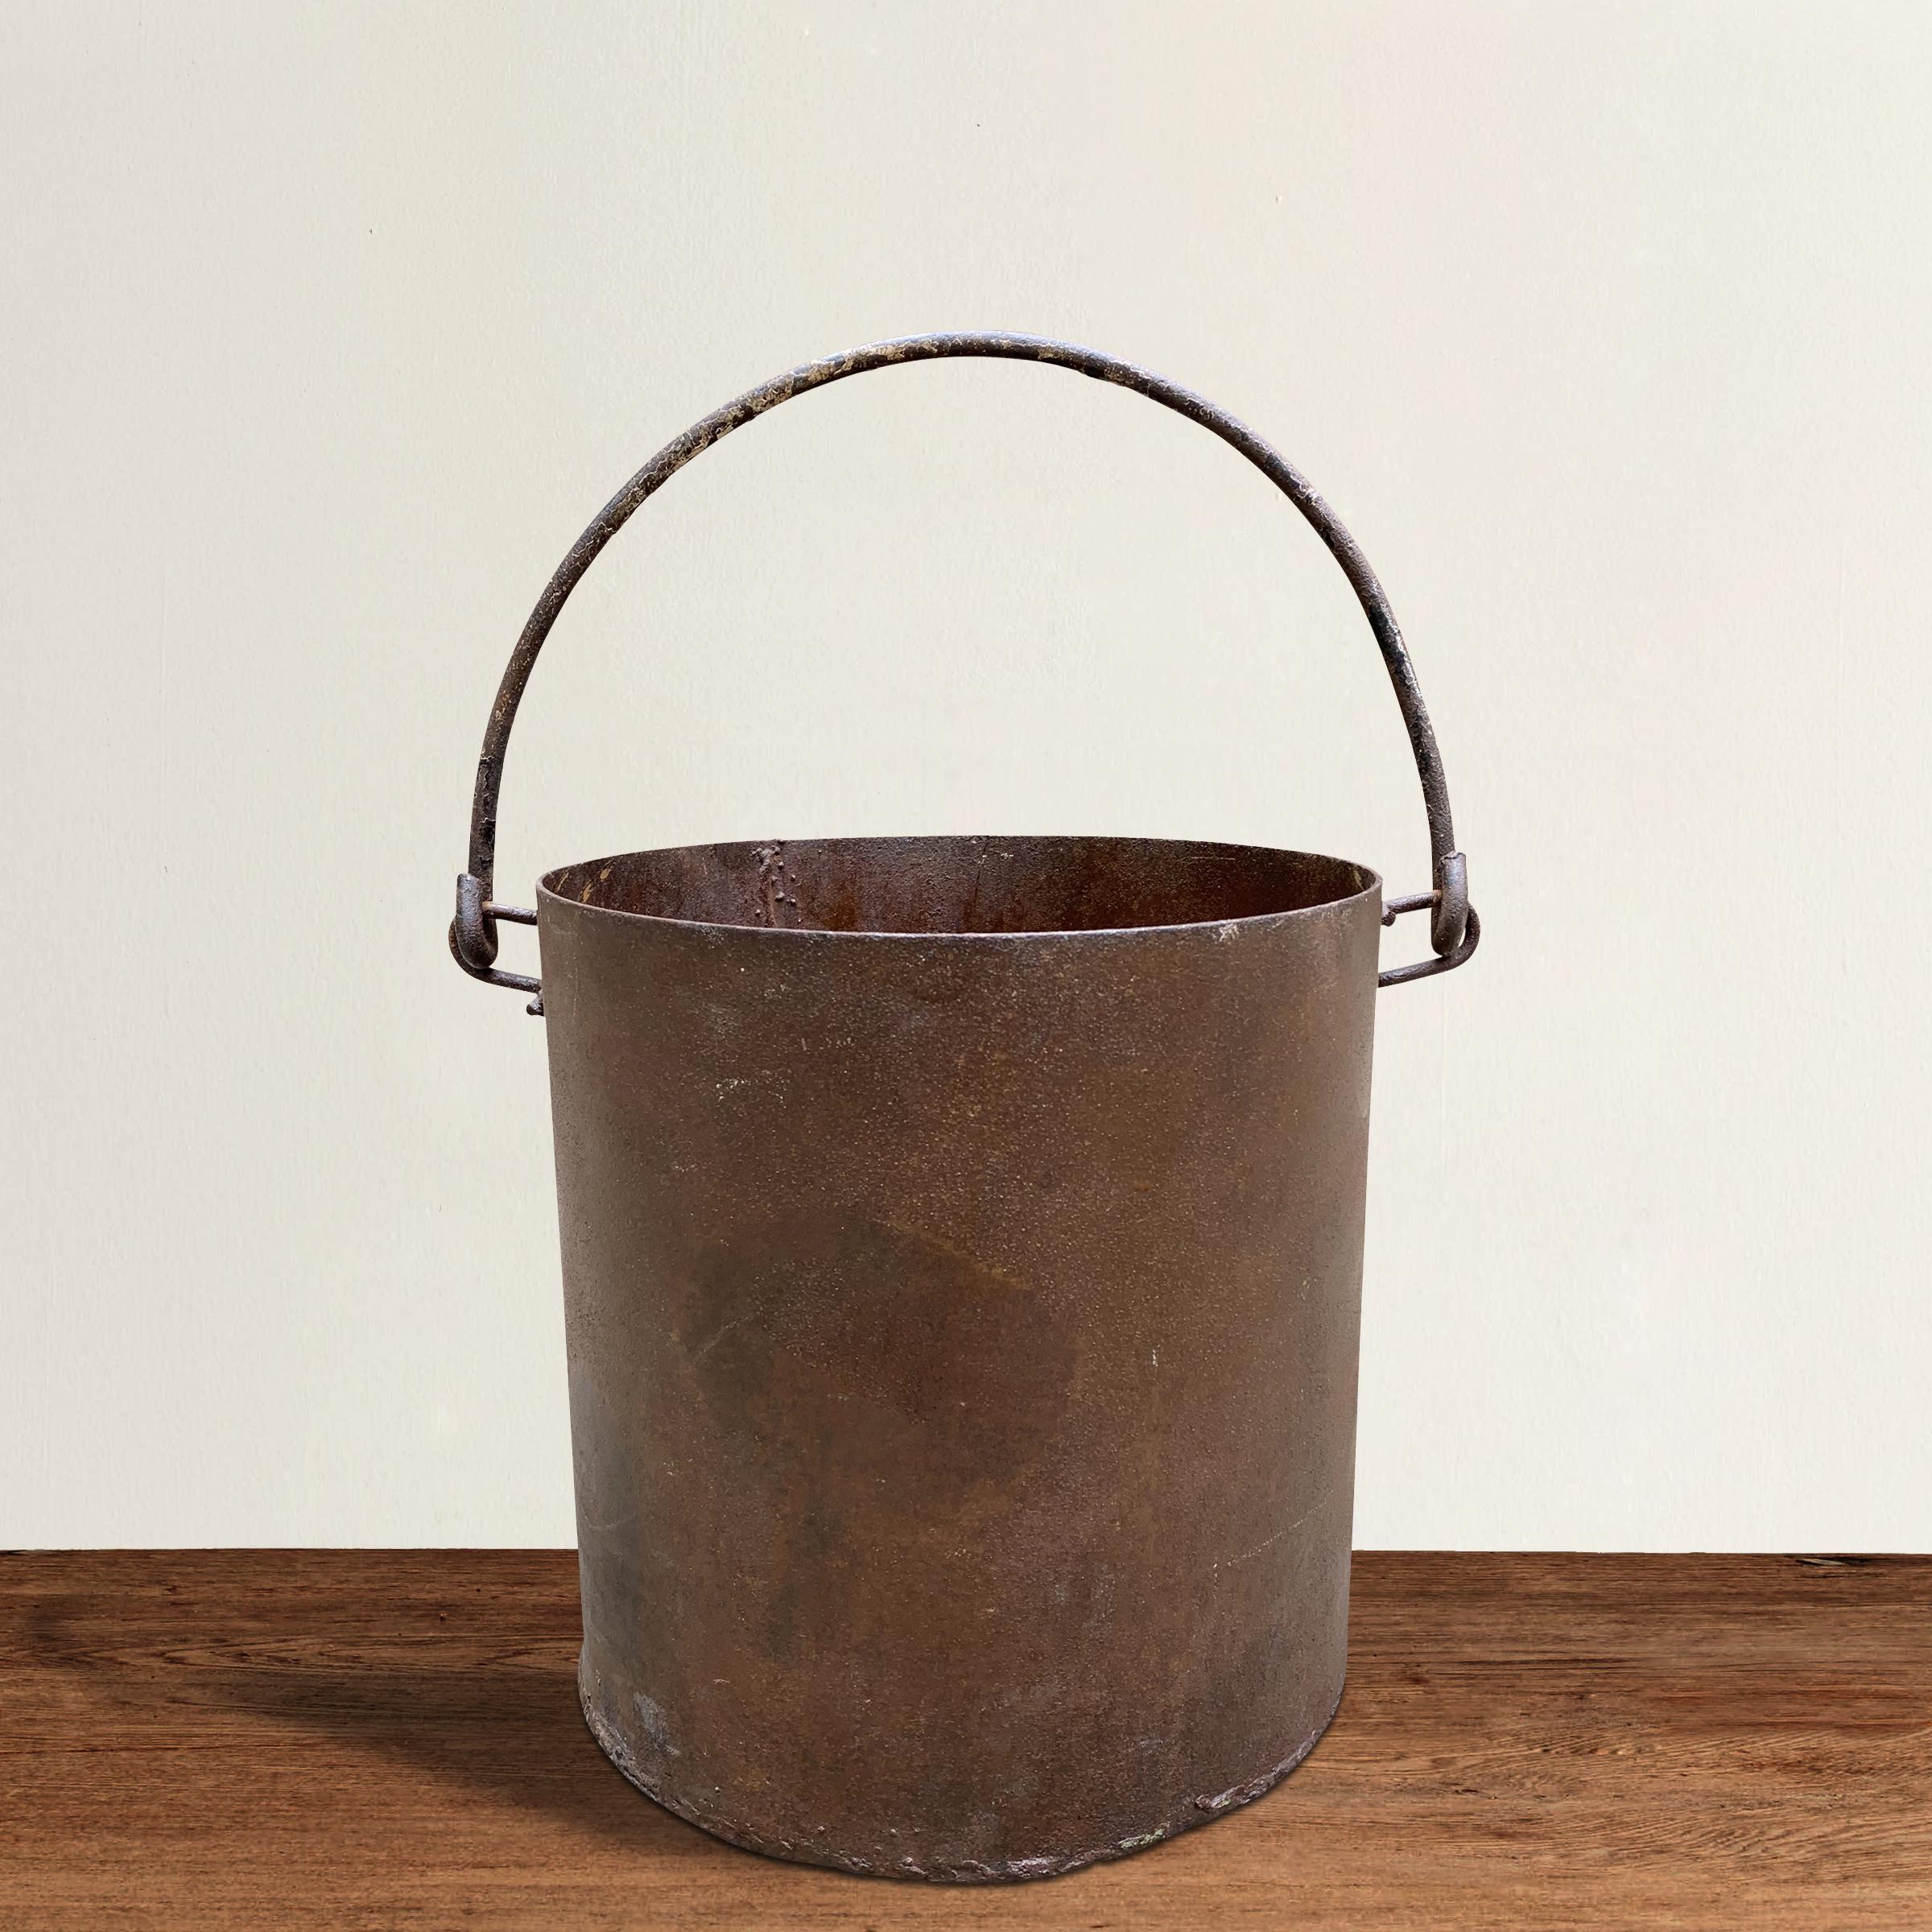 A stoic vintage iron bucket with a curved handle, and perfect for use as a waste paper basket in your powder room, office, or filled with ice and used to chill wine at your next fête.